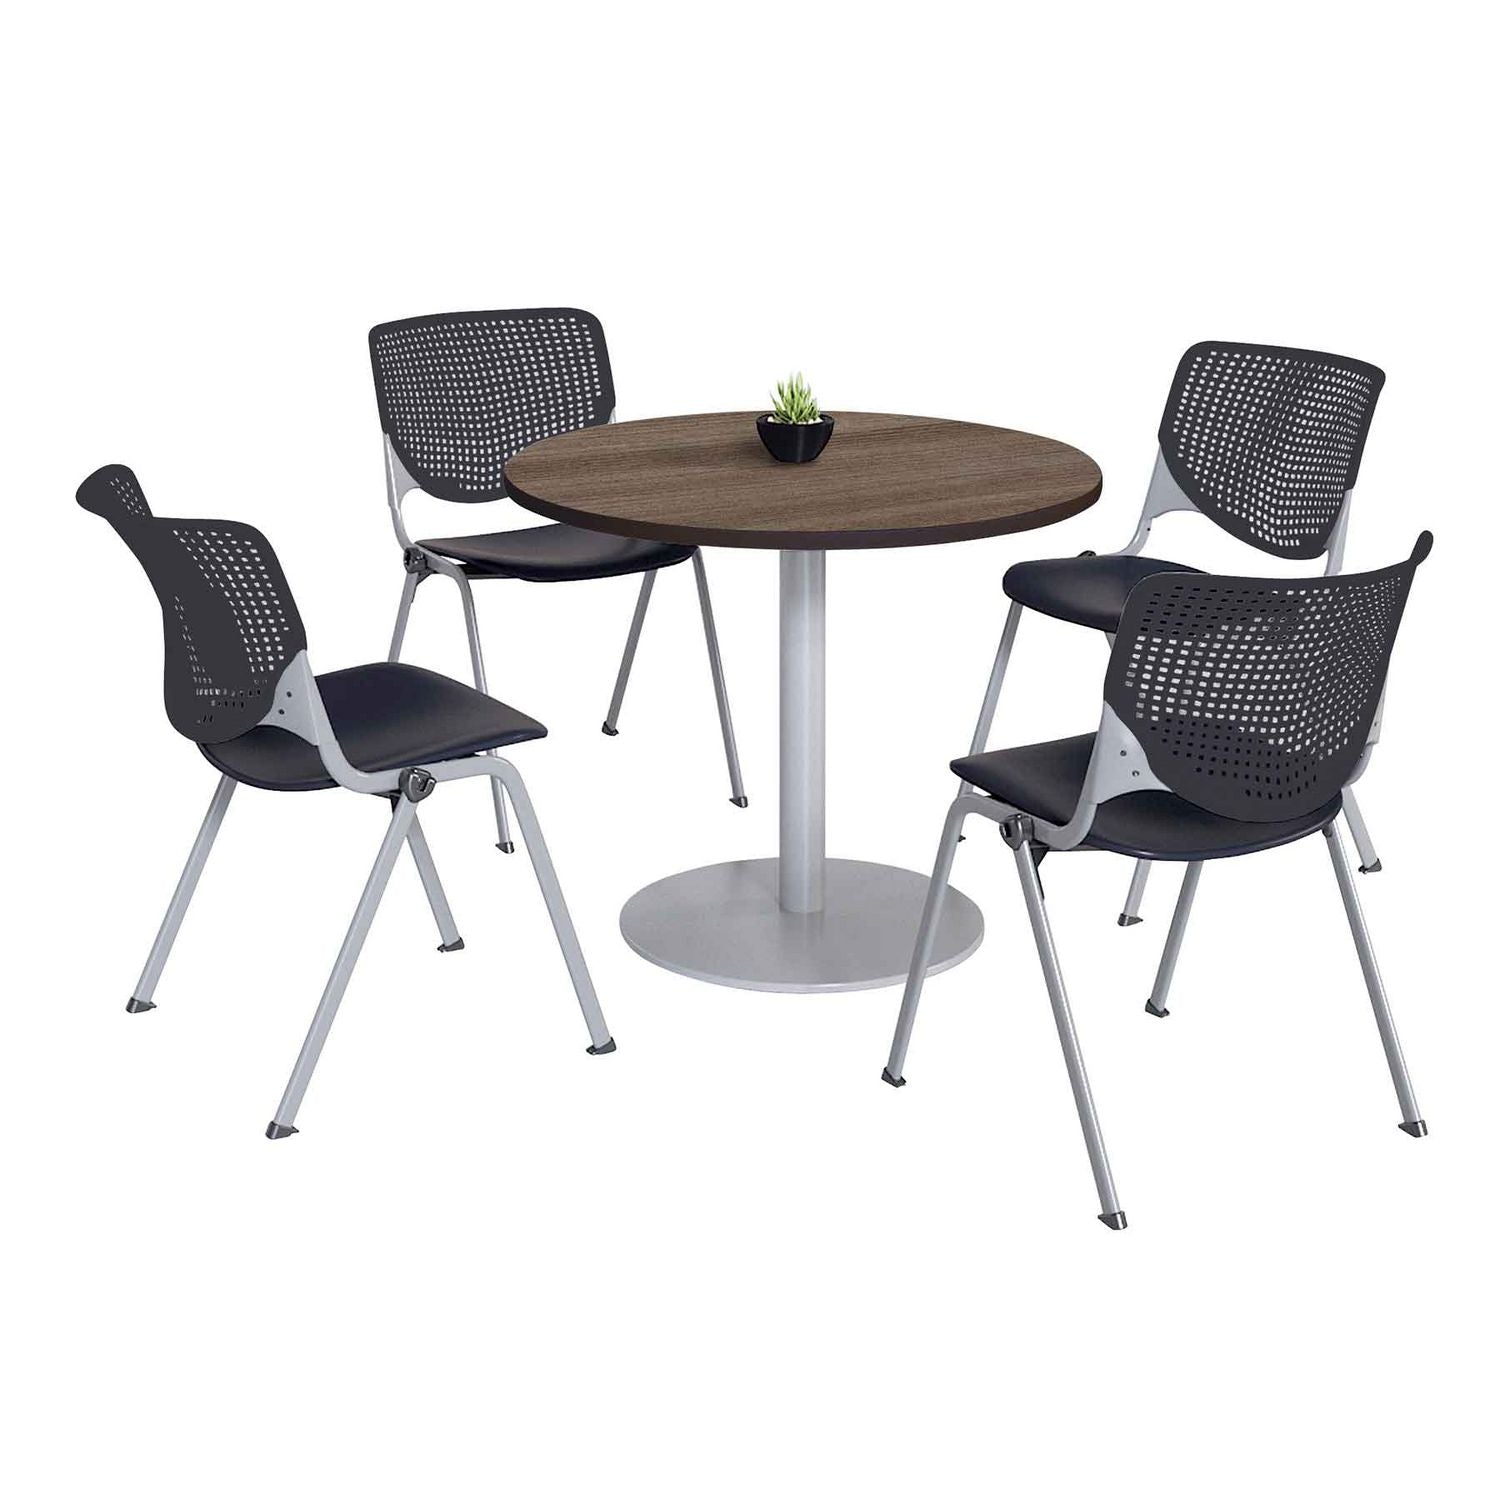 pedestal-table-with-four-black-kool-series-chairs-round-36-dia-x-29h-studio-teak-ships-in-4-6-business-days_kfi811774036894 - 2